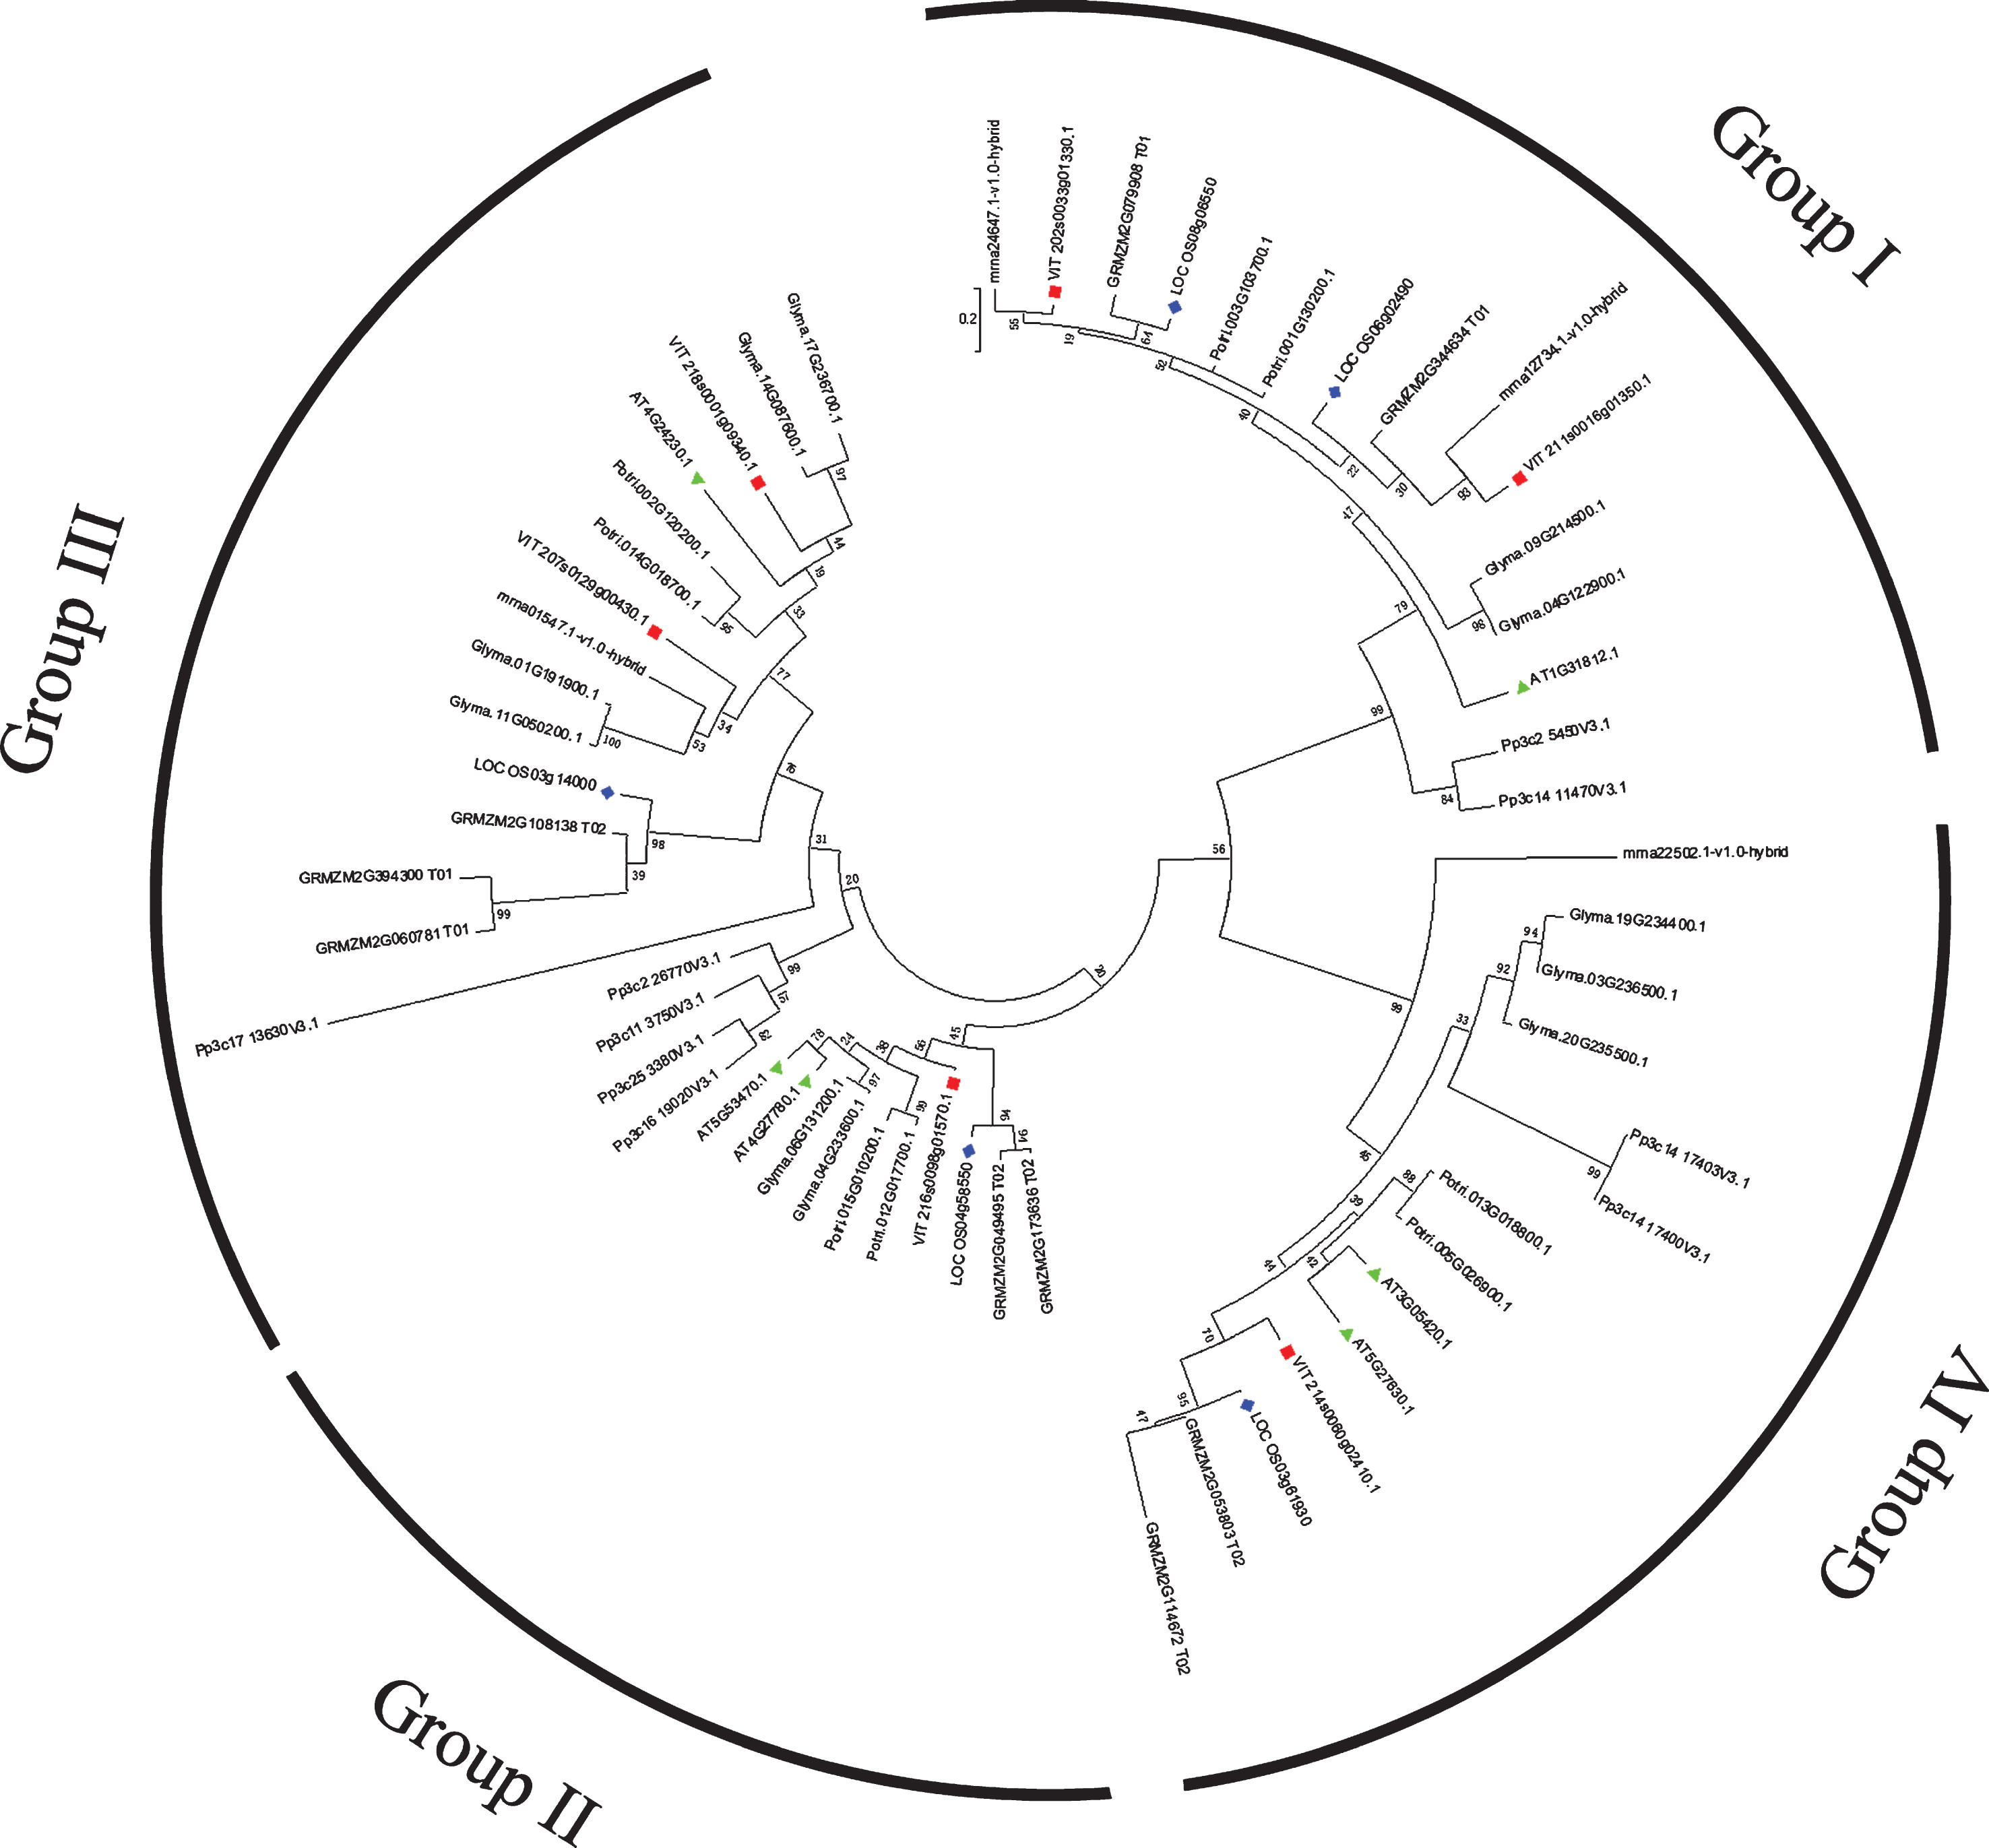 Phylogenetic analysis of grapevine ACB proteins with other plant. The phylogenetic tree was constructed with ACBP domain protein sequences from V. vinifera (VvACBP), Z. mays (ZmACBP), O. sativa (OsACBP), A. thaliana (AtACBP), F. vesca (FvACBP), G. max (GmACBP), P. trichocarpa (PtACBP) and P. patens (PpACBP). They were classified to four groups: I, II, III, IV. VvACB proteins are indicated with red squares and AtACB proteins with green triangles and OsACB proteins with blue diamonds. All accession numbers or locus IDs of the ACBP genes are listed in the phylogenetic tree.